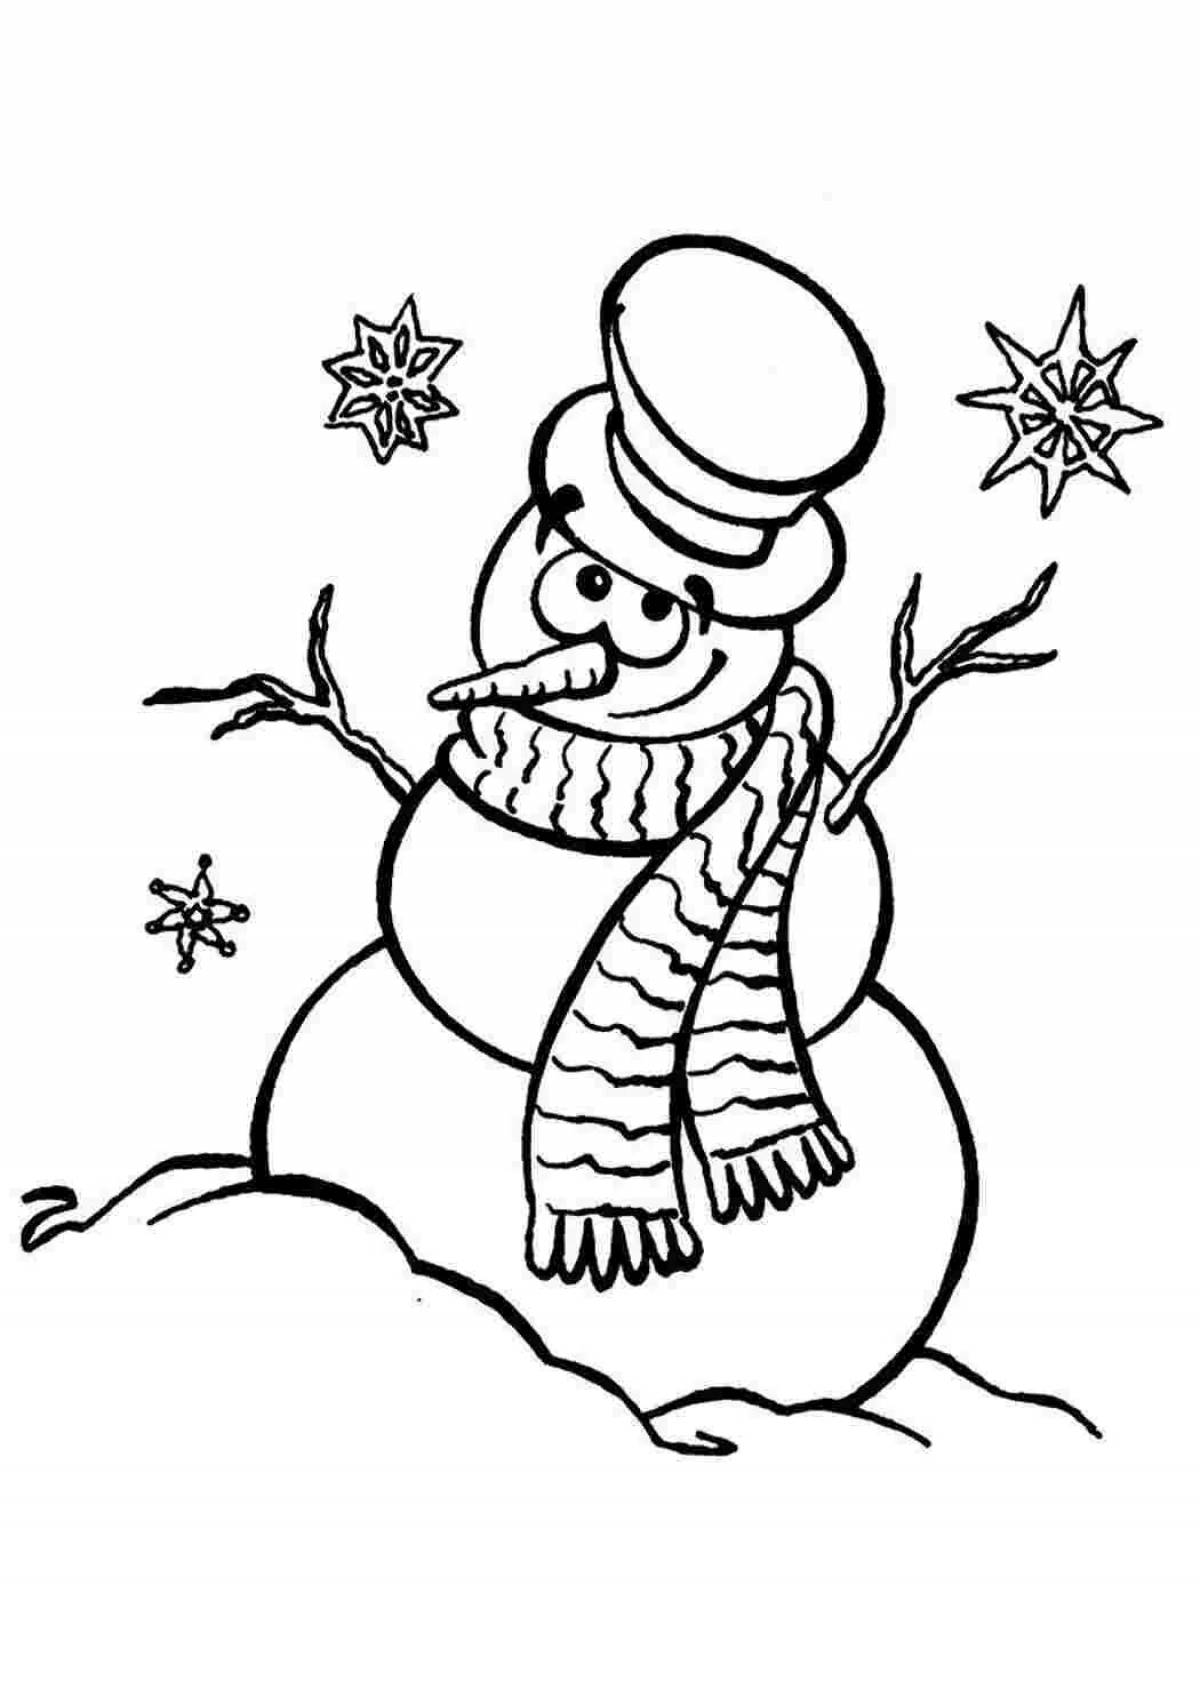 Luxury children's Christmas coloring book